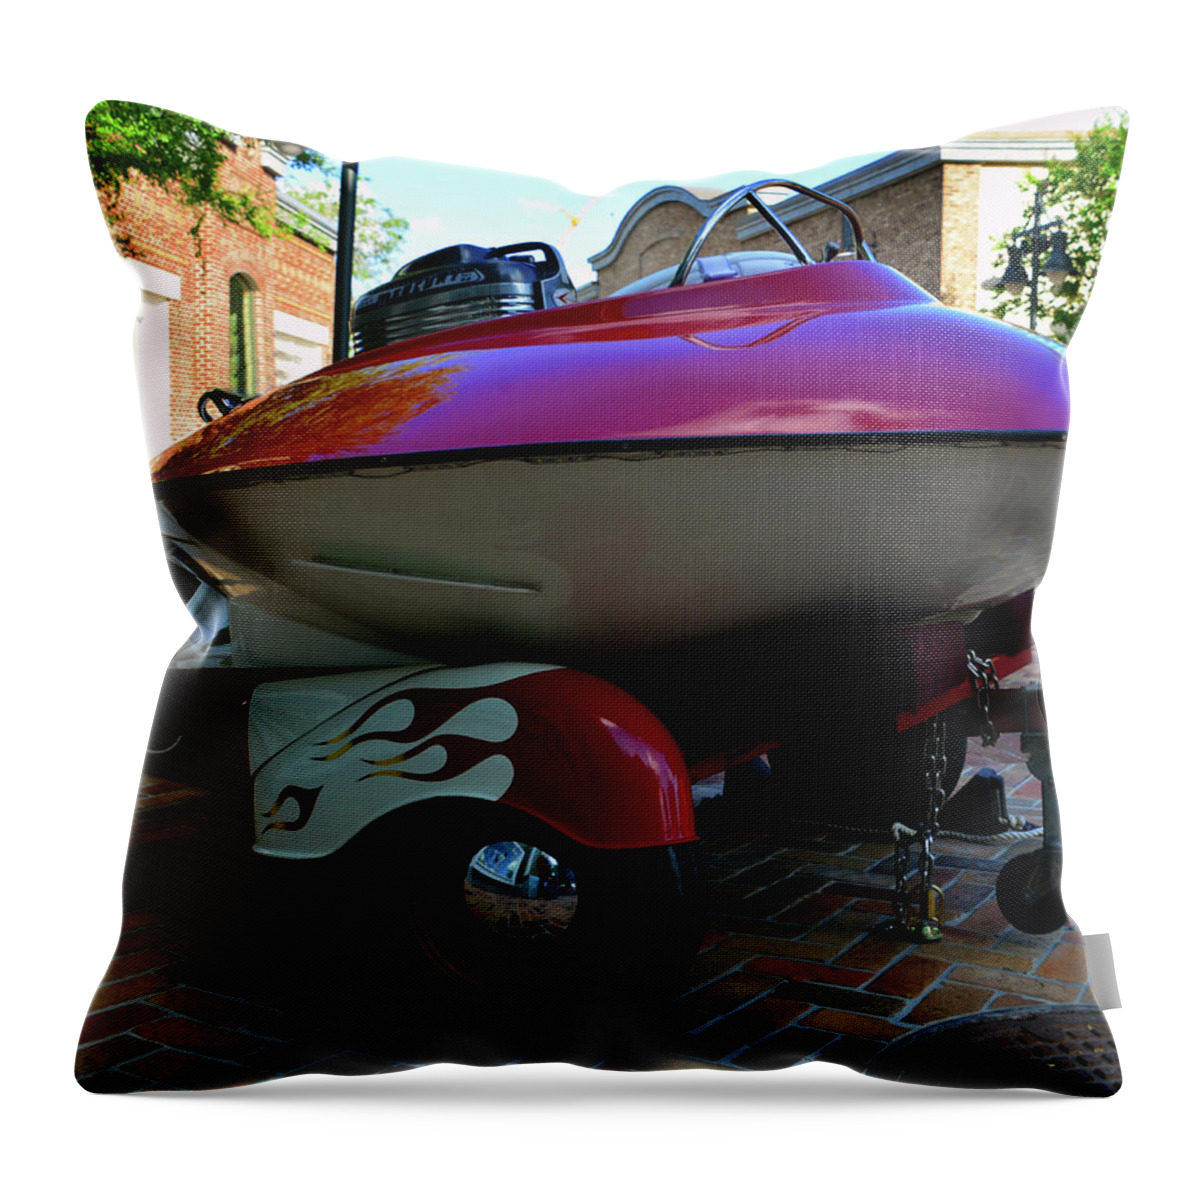 Saucer Boat Throw Pillow featuring the photograph Saucer boat by David Lee Thompson